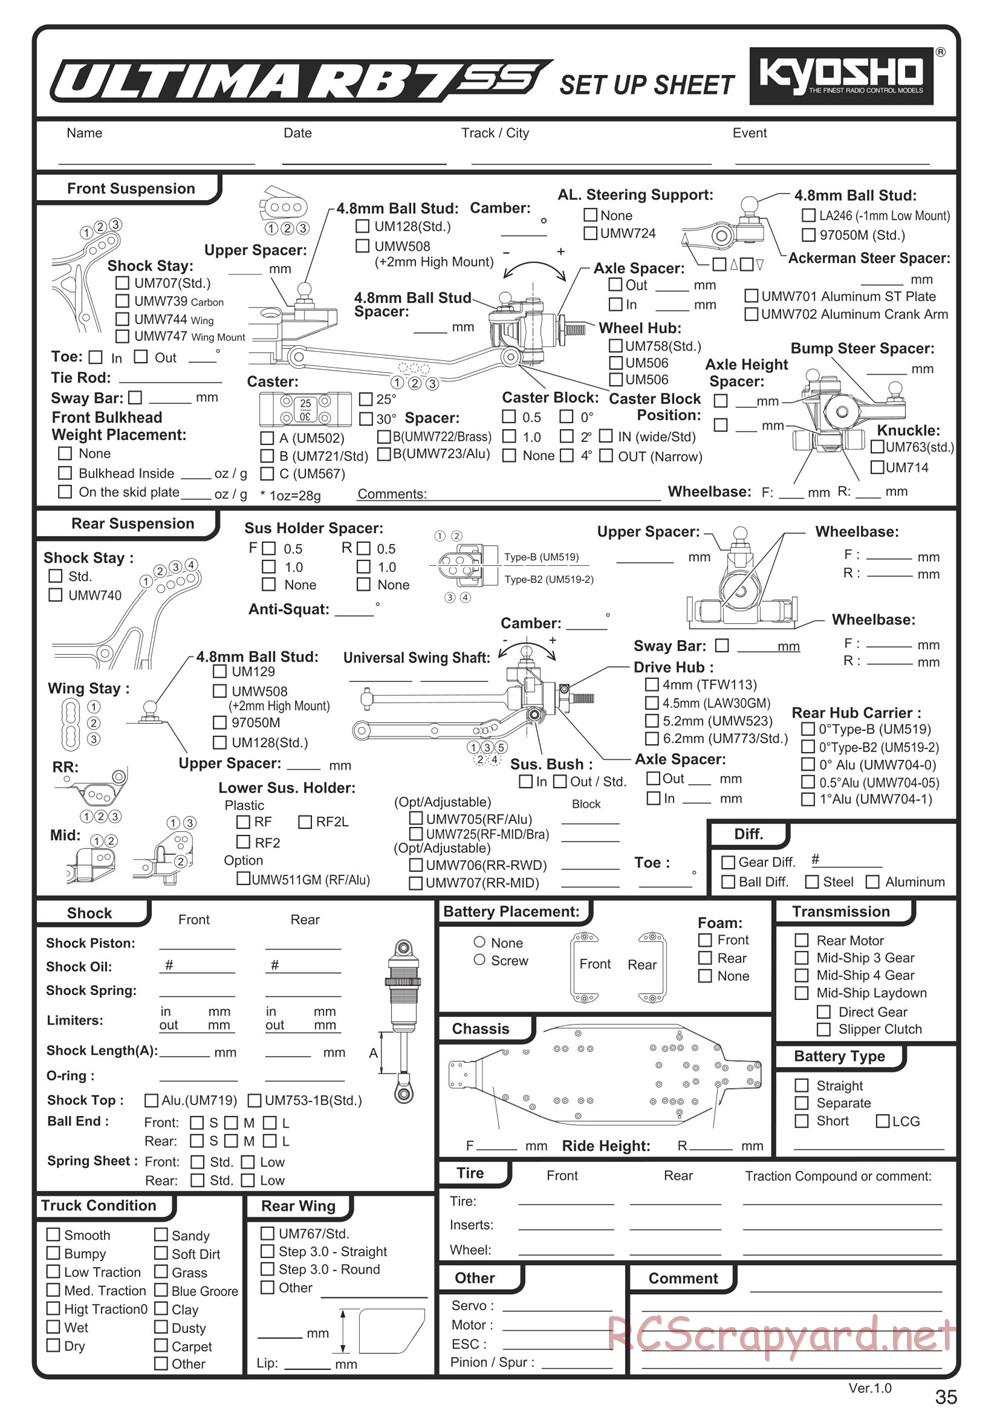 Kyosho - Ultima RB7SS - Manual - Page 35